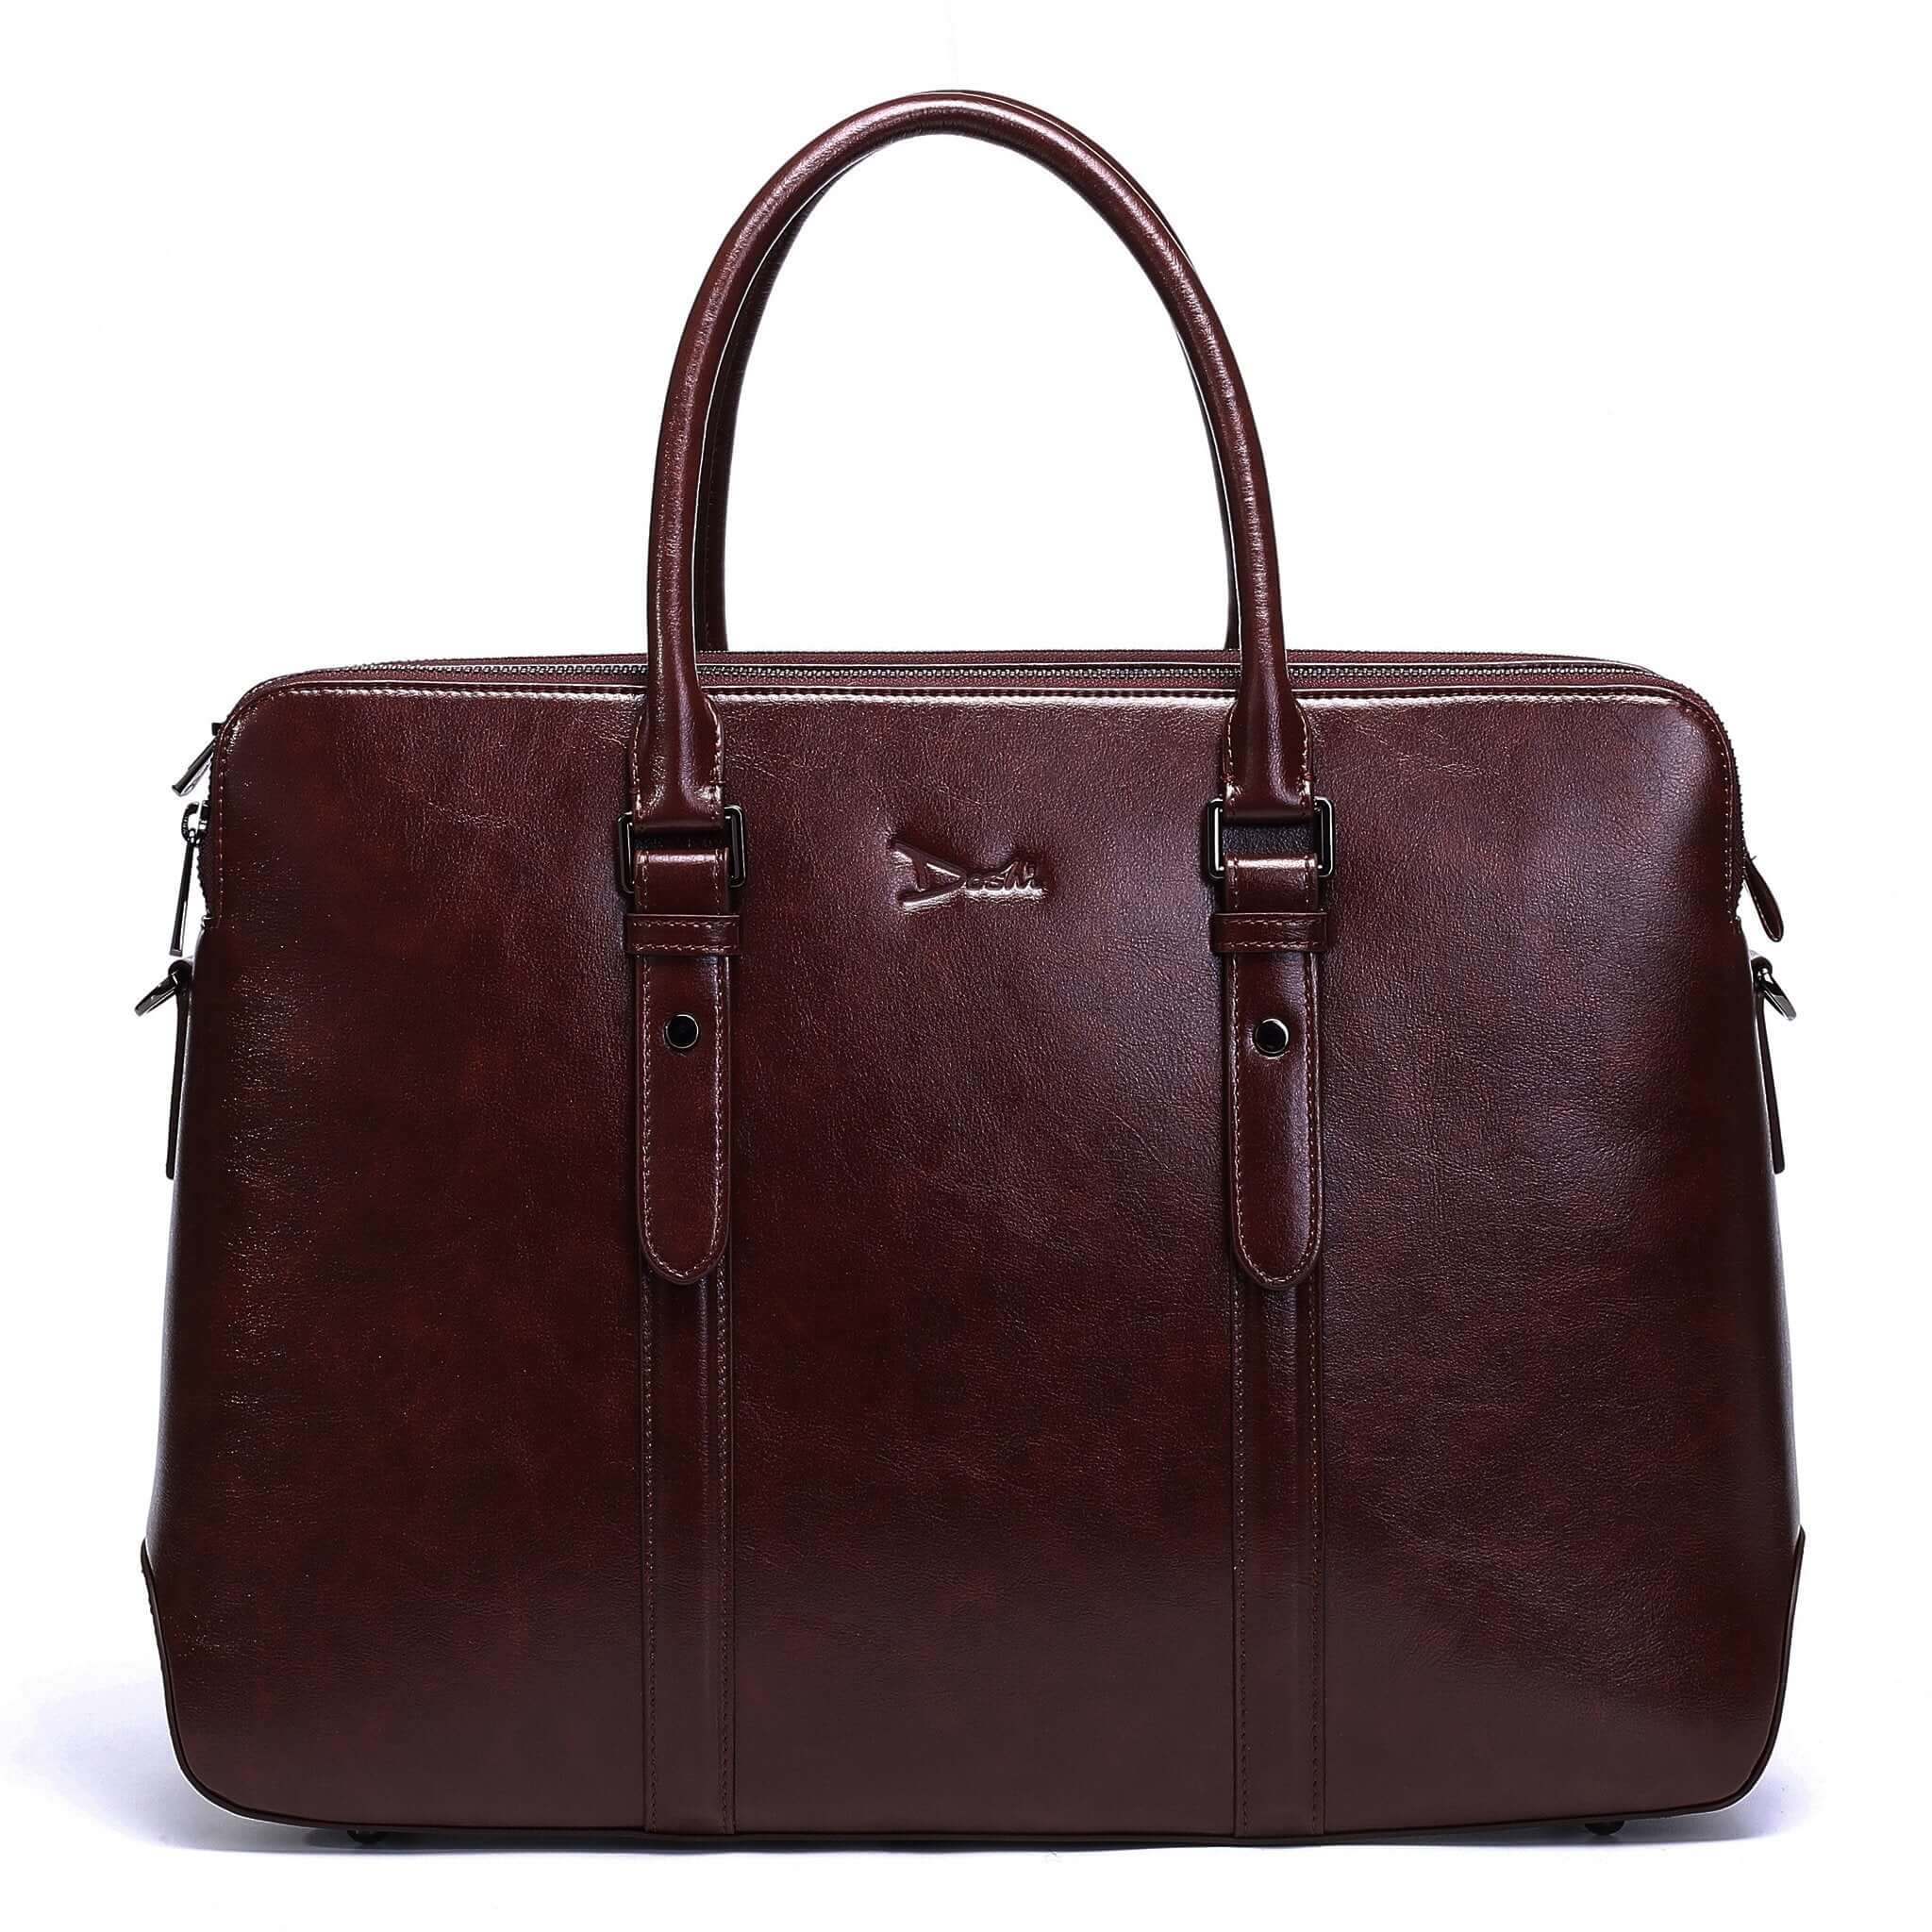 Vegan Briefcases and Other Must-Have Bags for Men | PETA